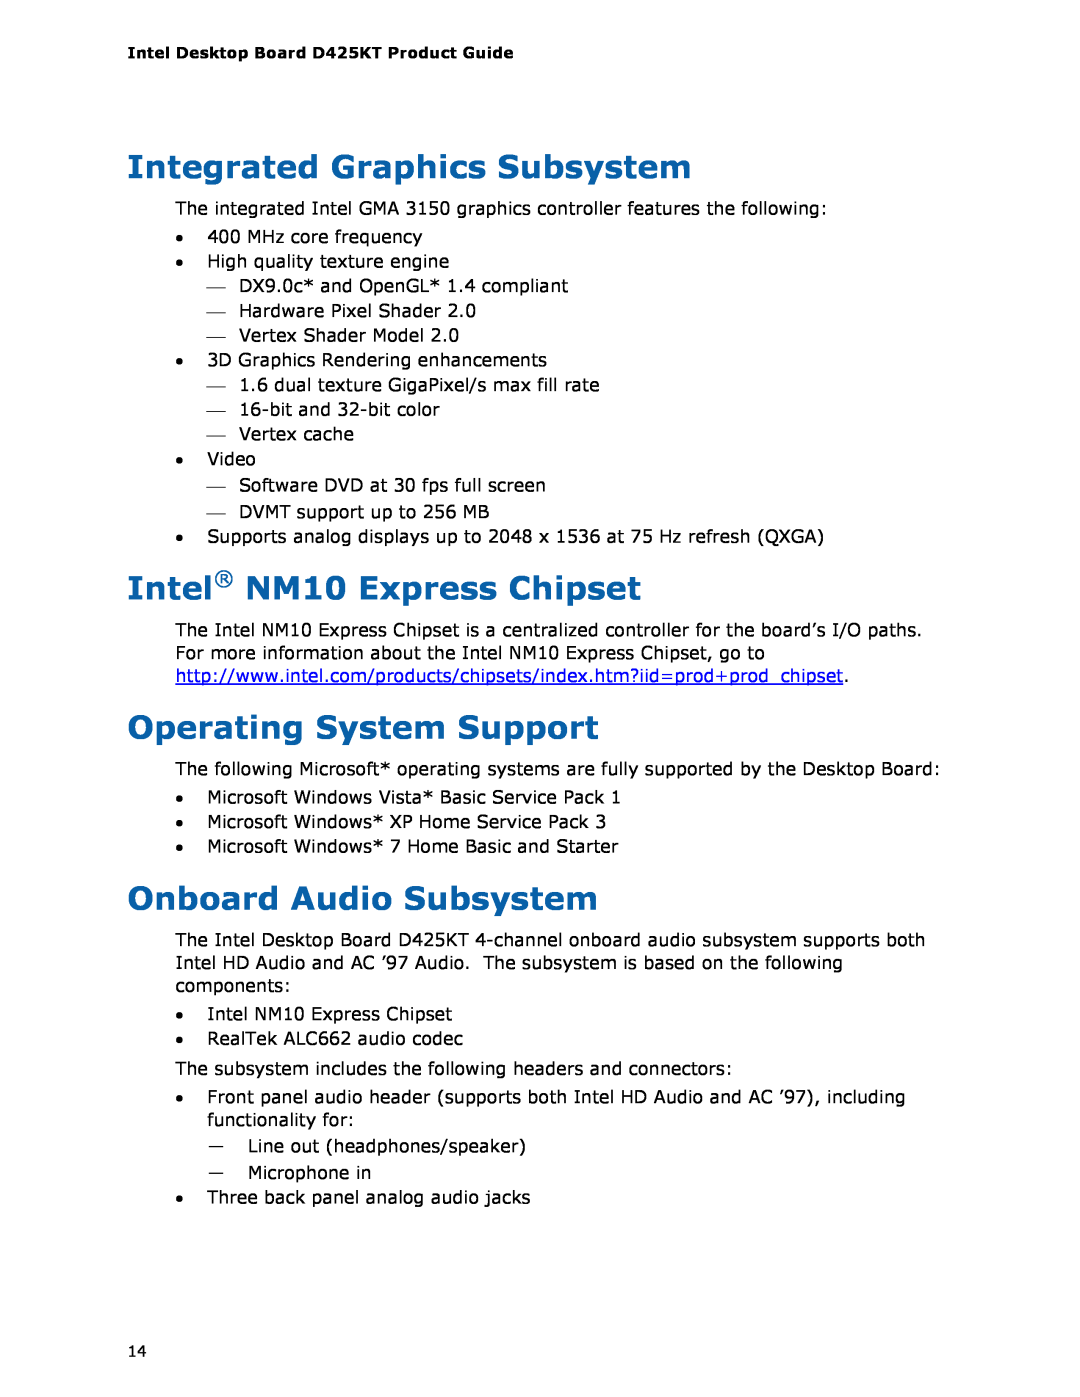 Intel D425KT Integrated Graphics Subsystem, Intel NM10 Express Chipset, Operating System Support, Onboard Audio Subsystem 